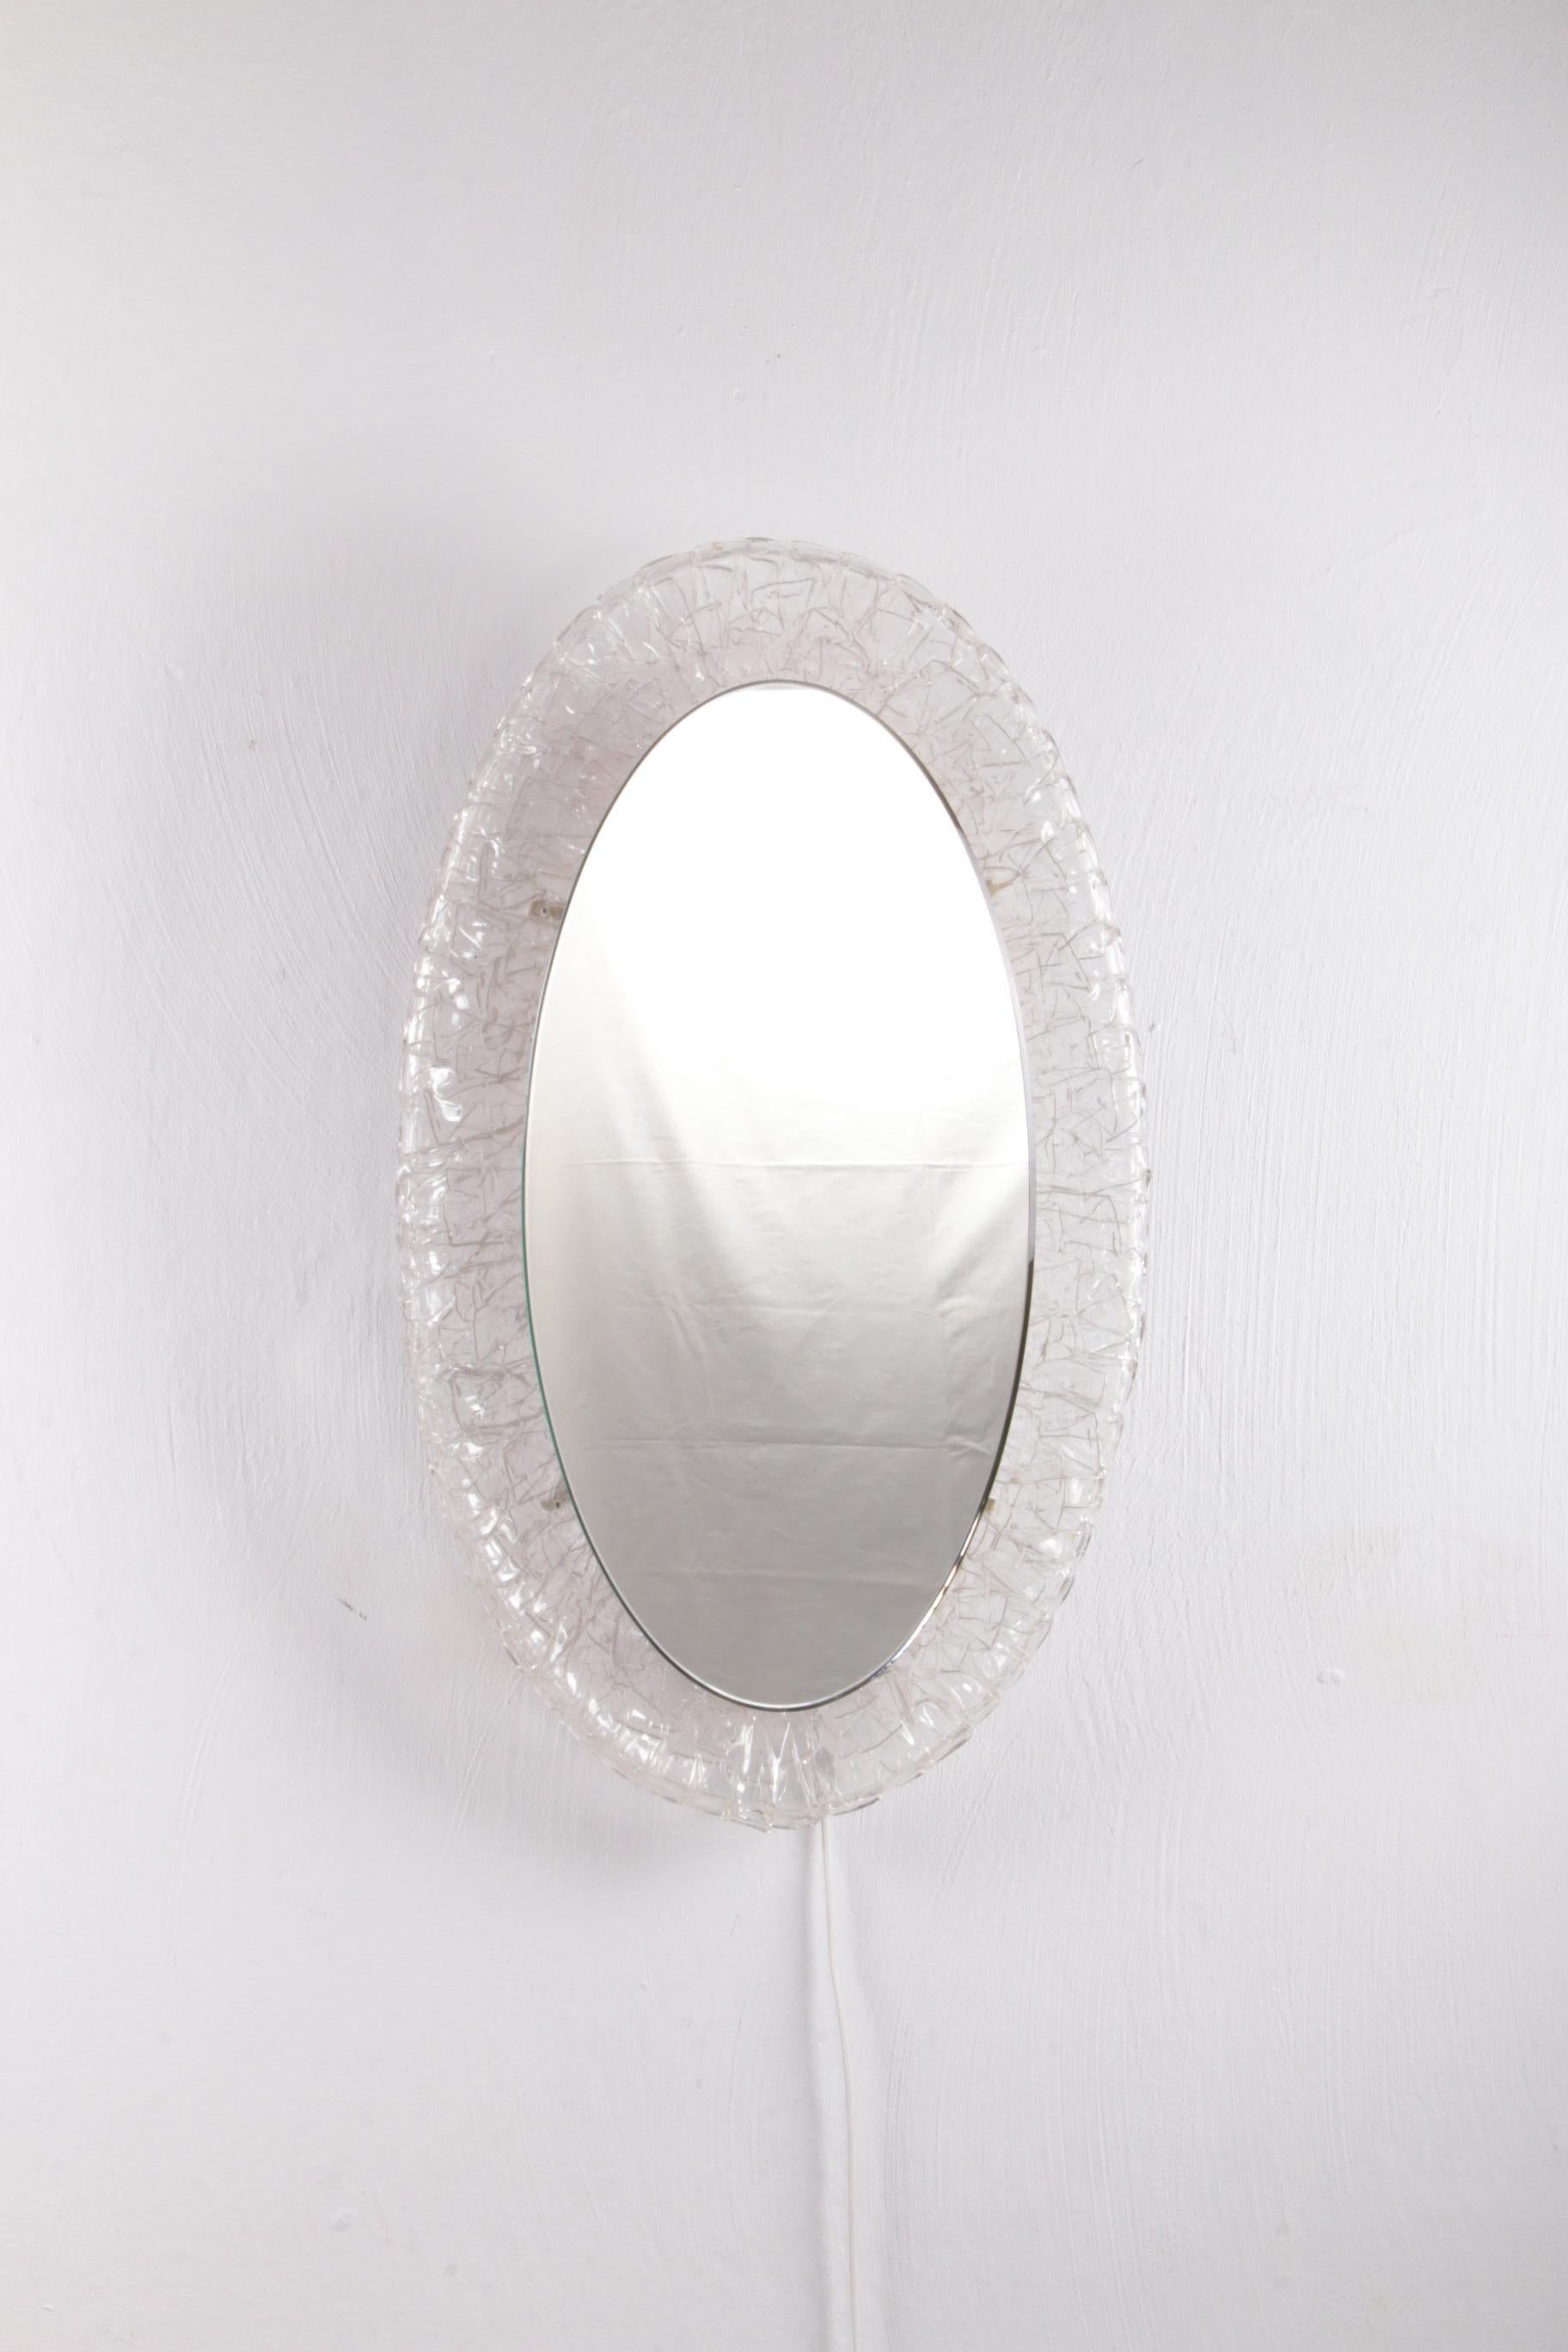 Large oval Plexiglas mirror with lighting, 1960 Germany.


The oval mirror is made of metal with plexiglass and was produced in the 1960s.

The mirror has interior lighting which emits a warm soft light when it is on. The mirror is in very good